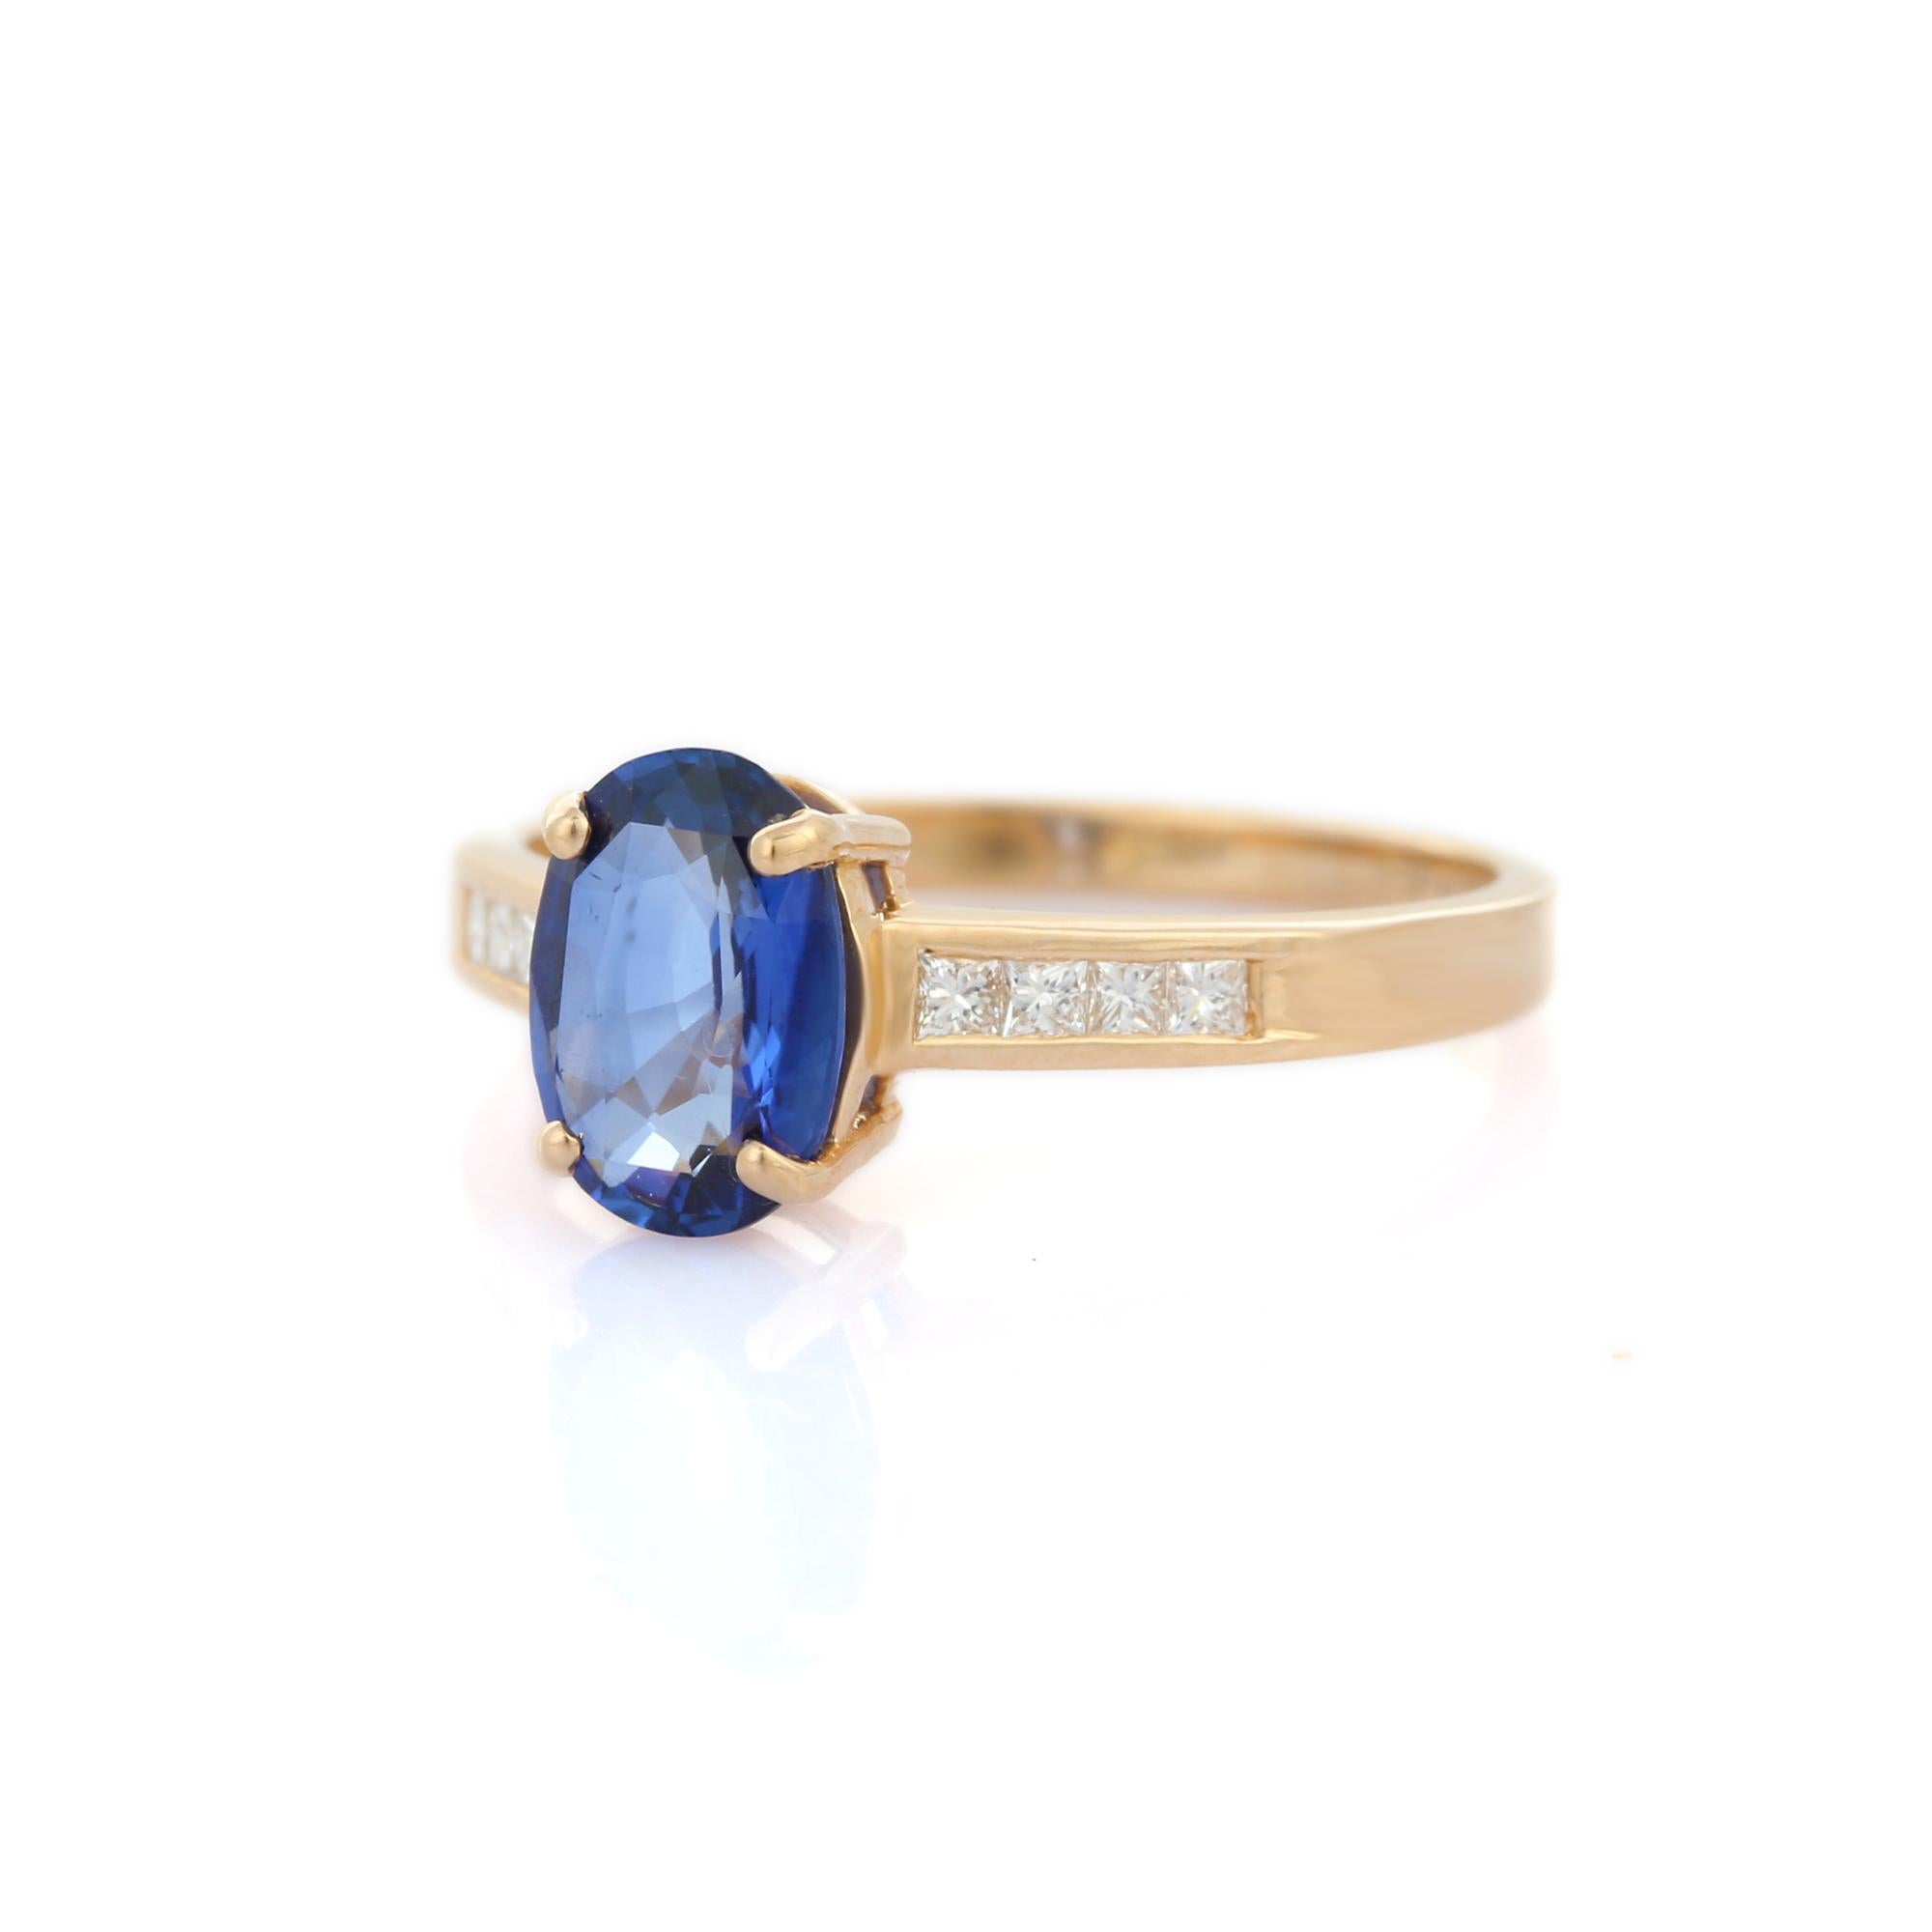 For Sale:  Solitaire Oval Blue Sapphire Diamond Engagement Ring in 14k Solid Yellow Gold 3